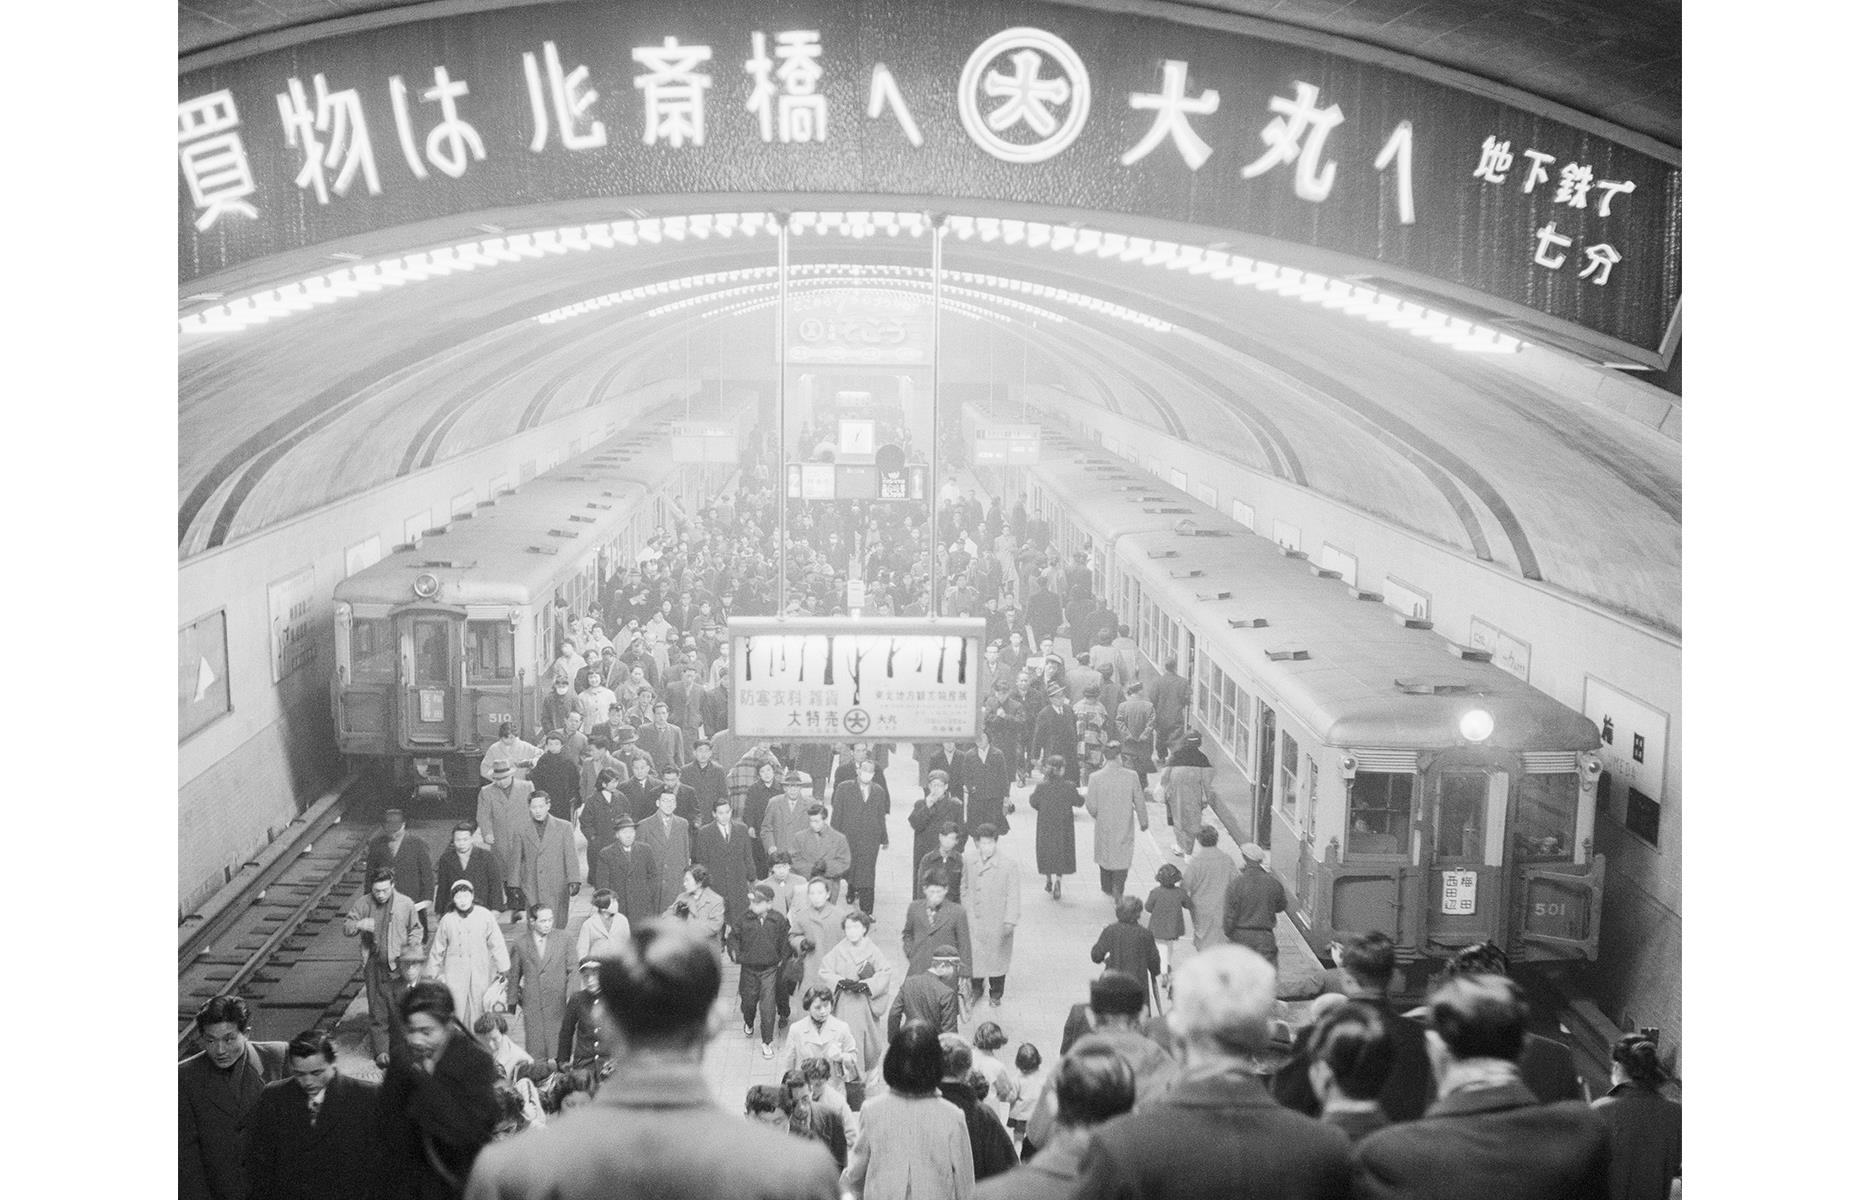 <p>Japan's first subway system opened in Tokyo in 1927, and Osaka soon followed suit in 1933. This photo dating from 1956 shows thronging crowds as far as the eye can see at an Osaka station.</p>  <p><strong><a href="https://www.loveexploring.com/galleries/97614/incredible-images-that-capture-the-history-of-train-travel">Discover the amazing history of train travel</a></strong></p>